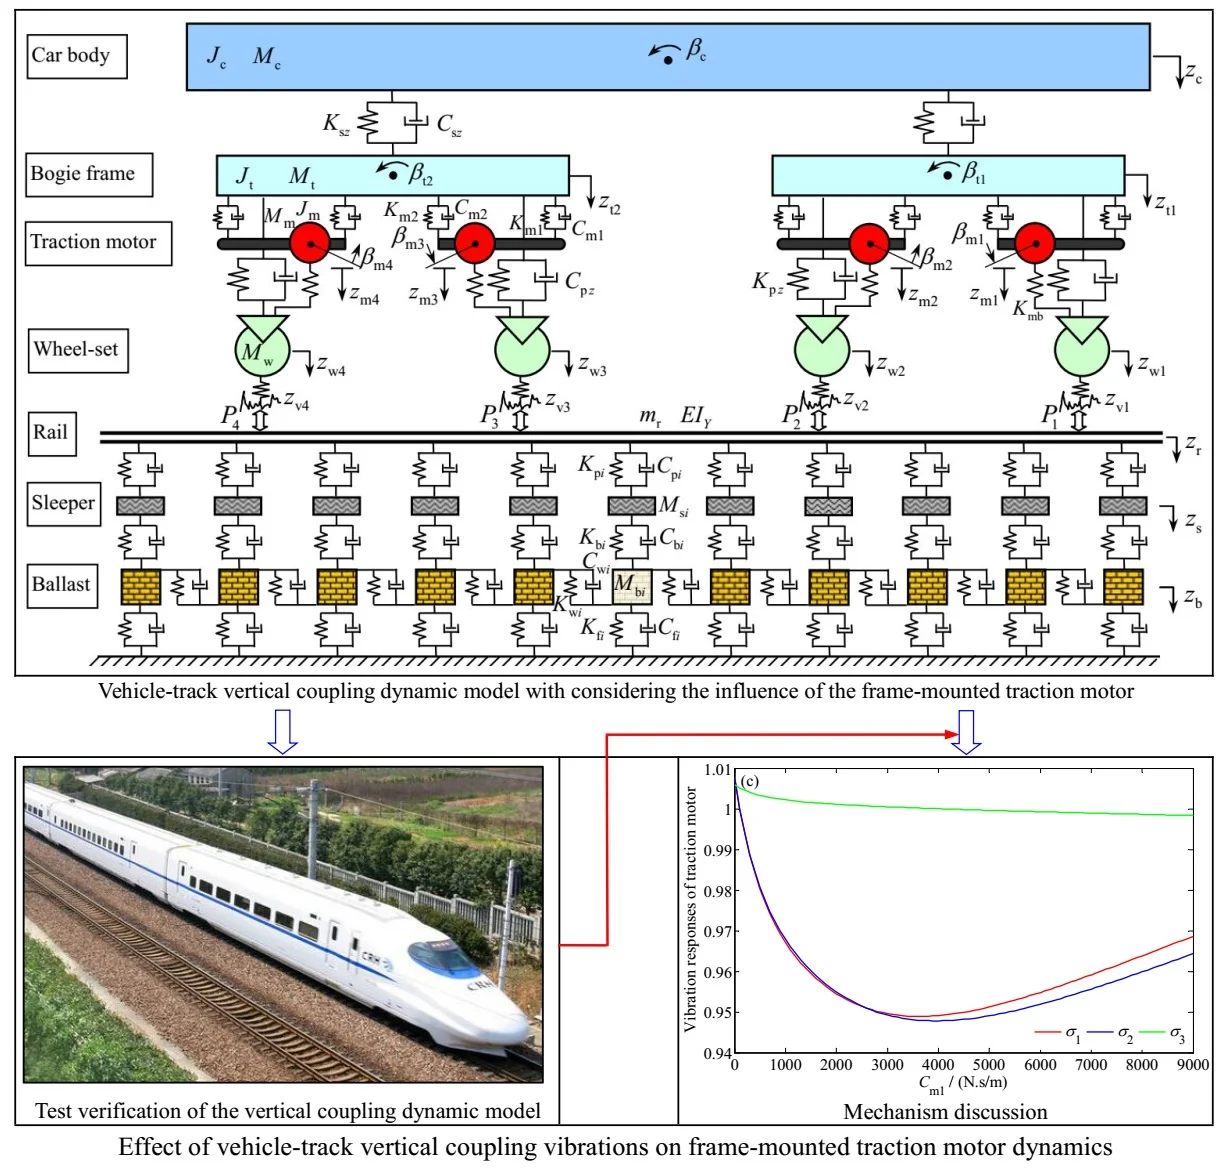 Effect of vehicle-track vertical coupling vibrations on frame-mounted traction motor dynamics